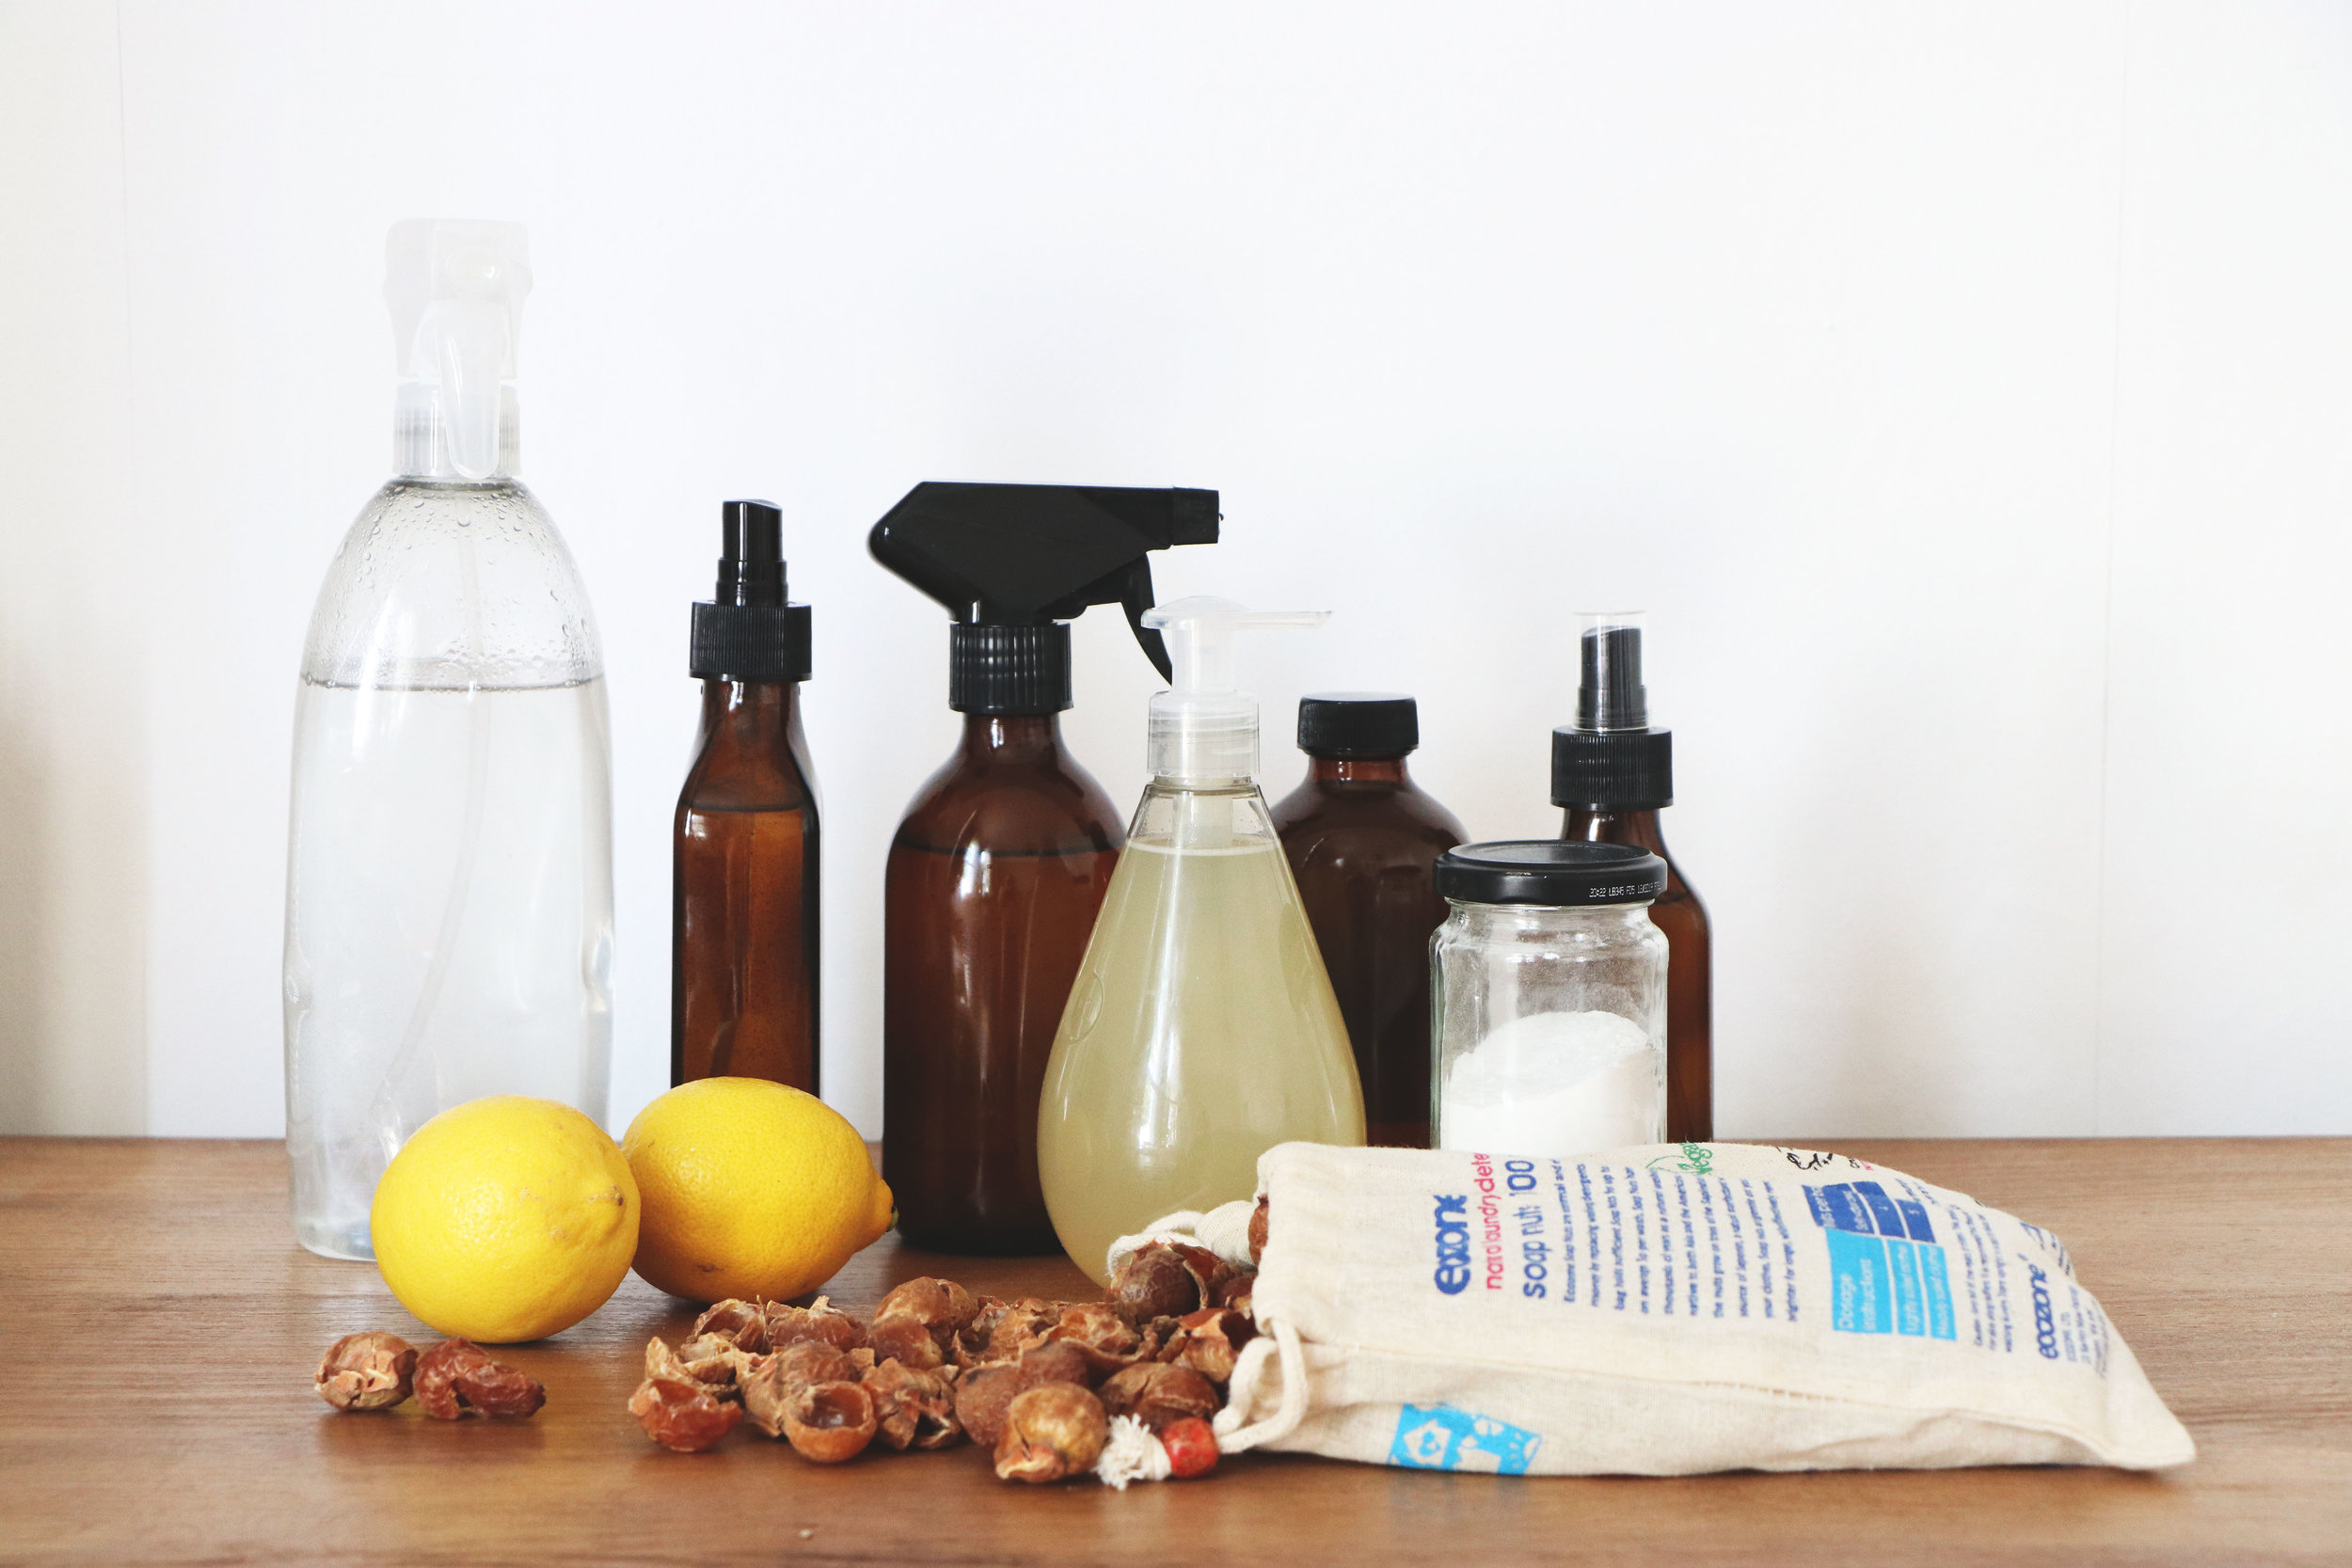 Biodegradable Cleaning Products